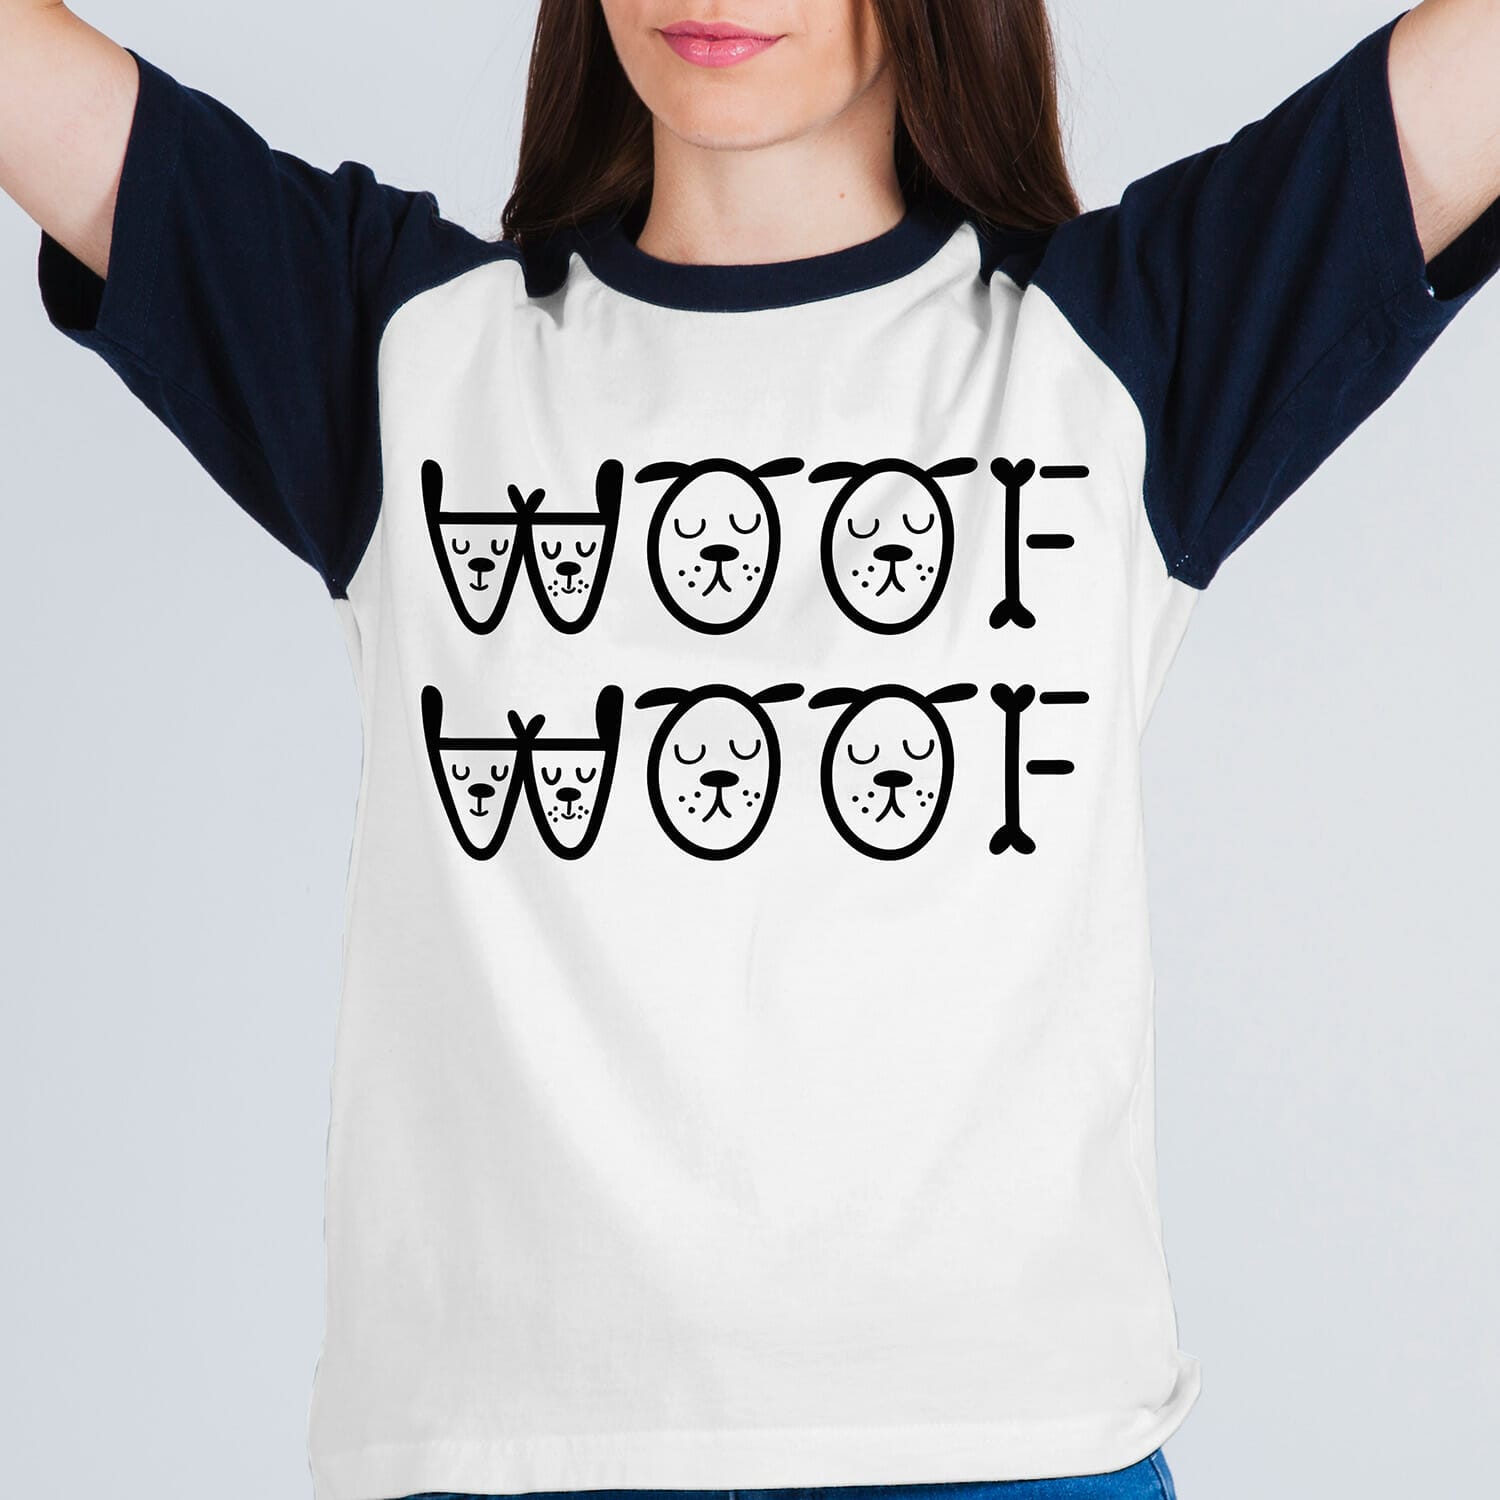 Woof Woof Tshirt design For Dog Lovers